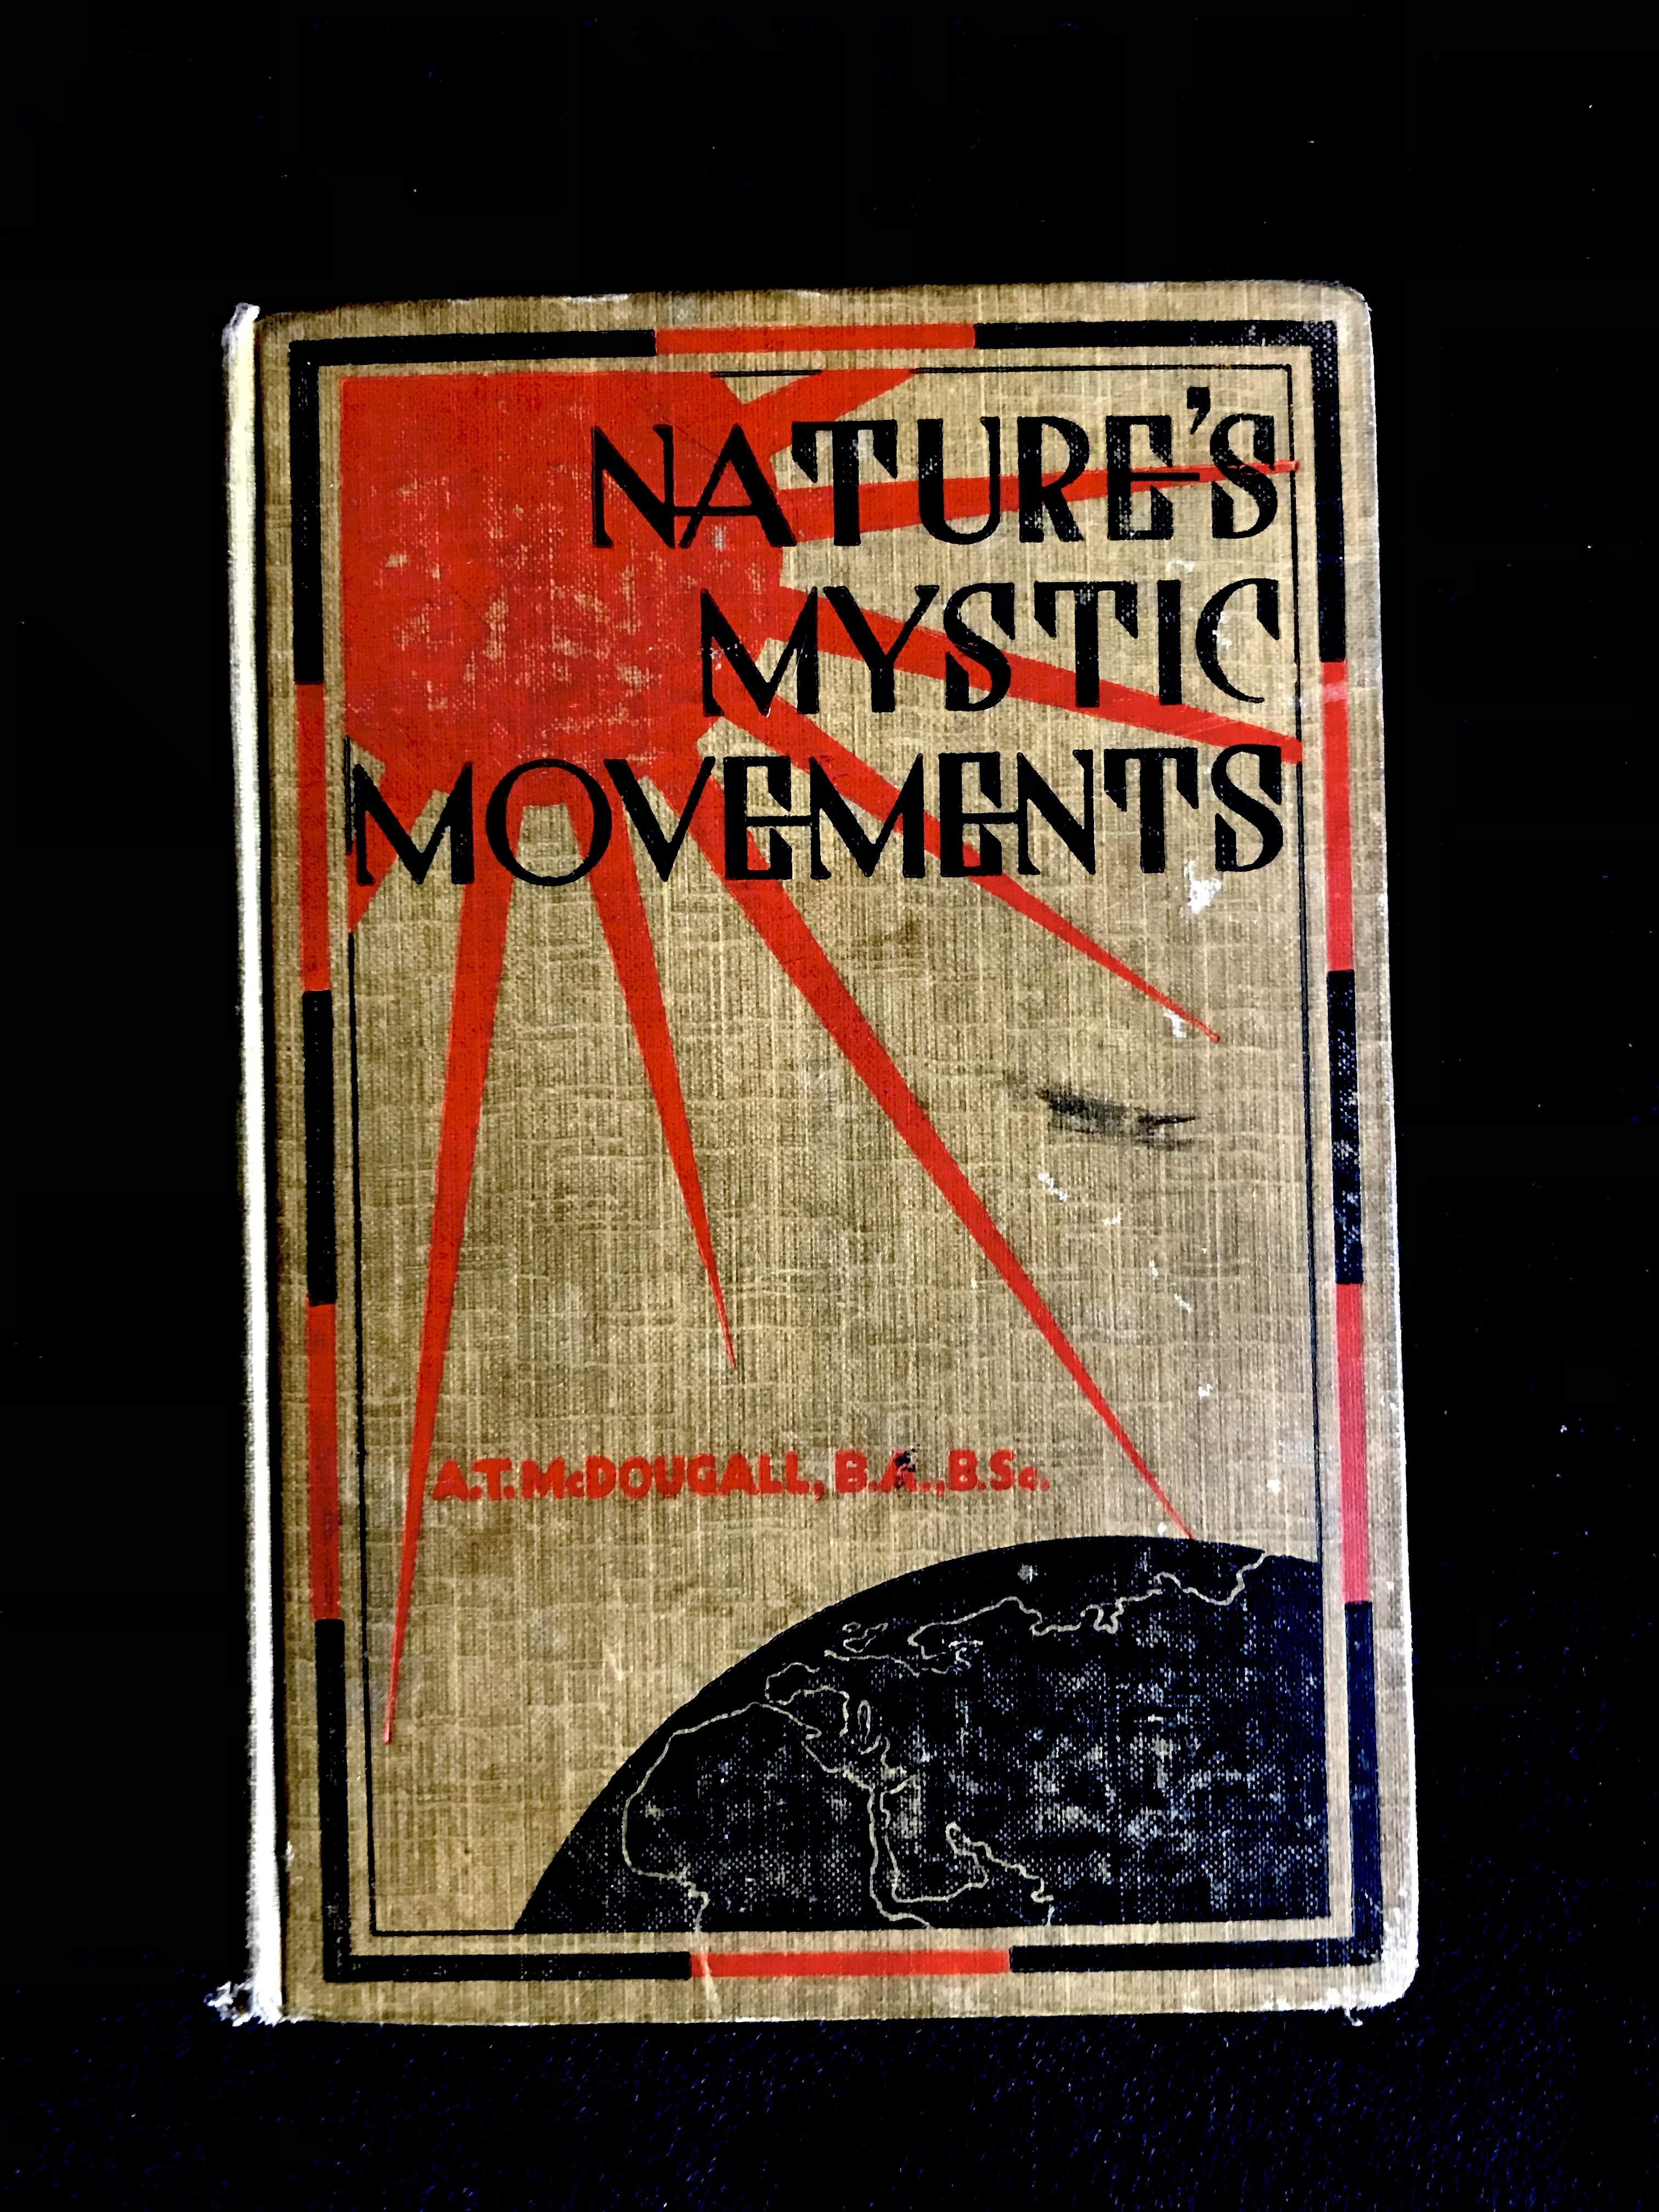 Nature's Mystic Movements by A.T. McDoughall